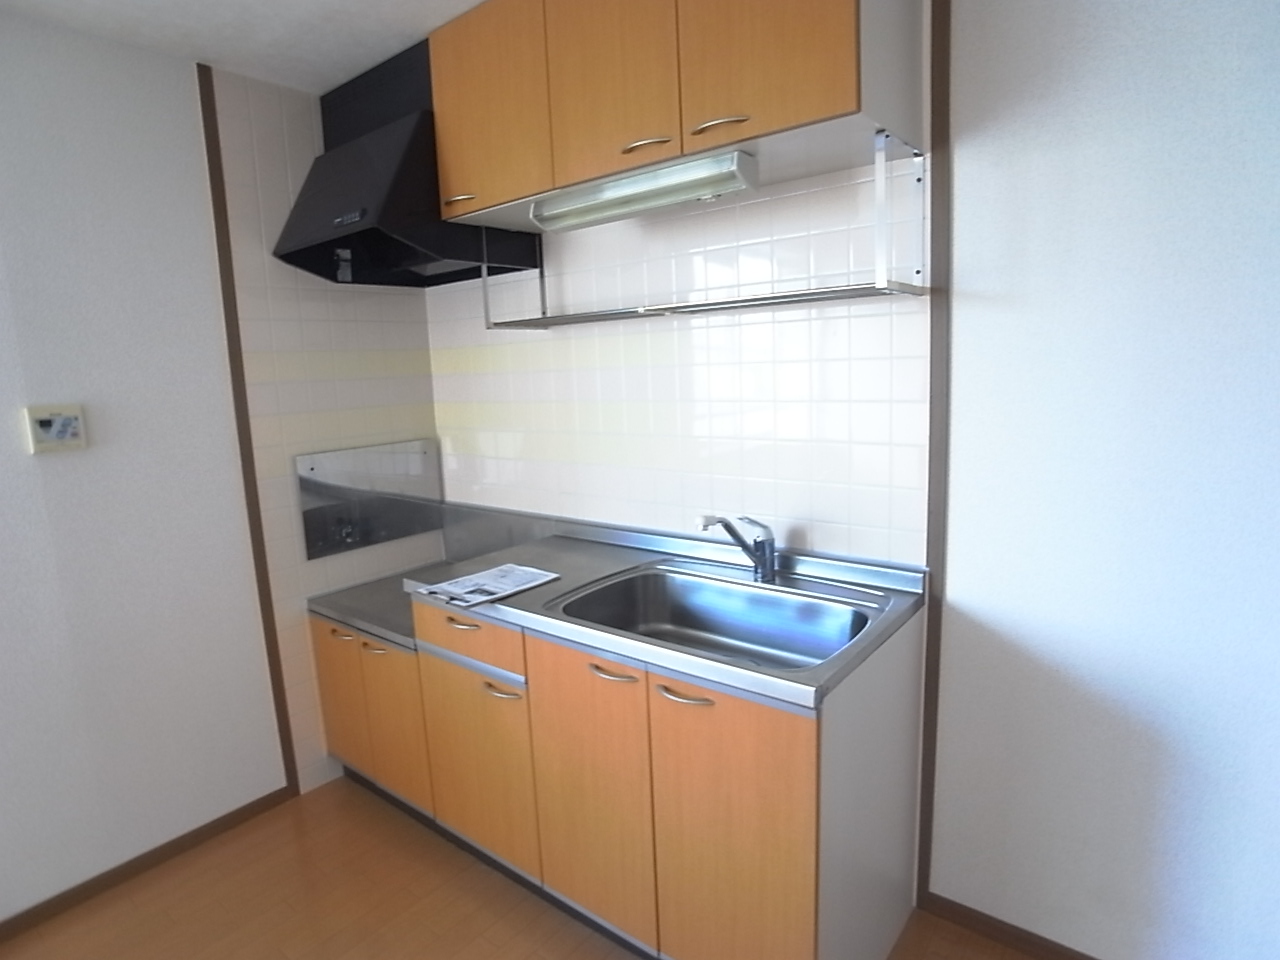 Kitchen. It is a dish also Hakadori likely in a clean kitchen ^^